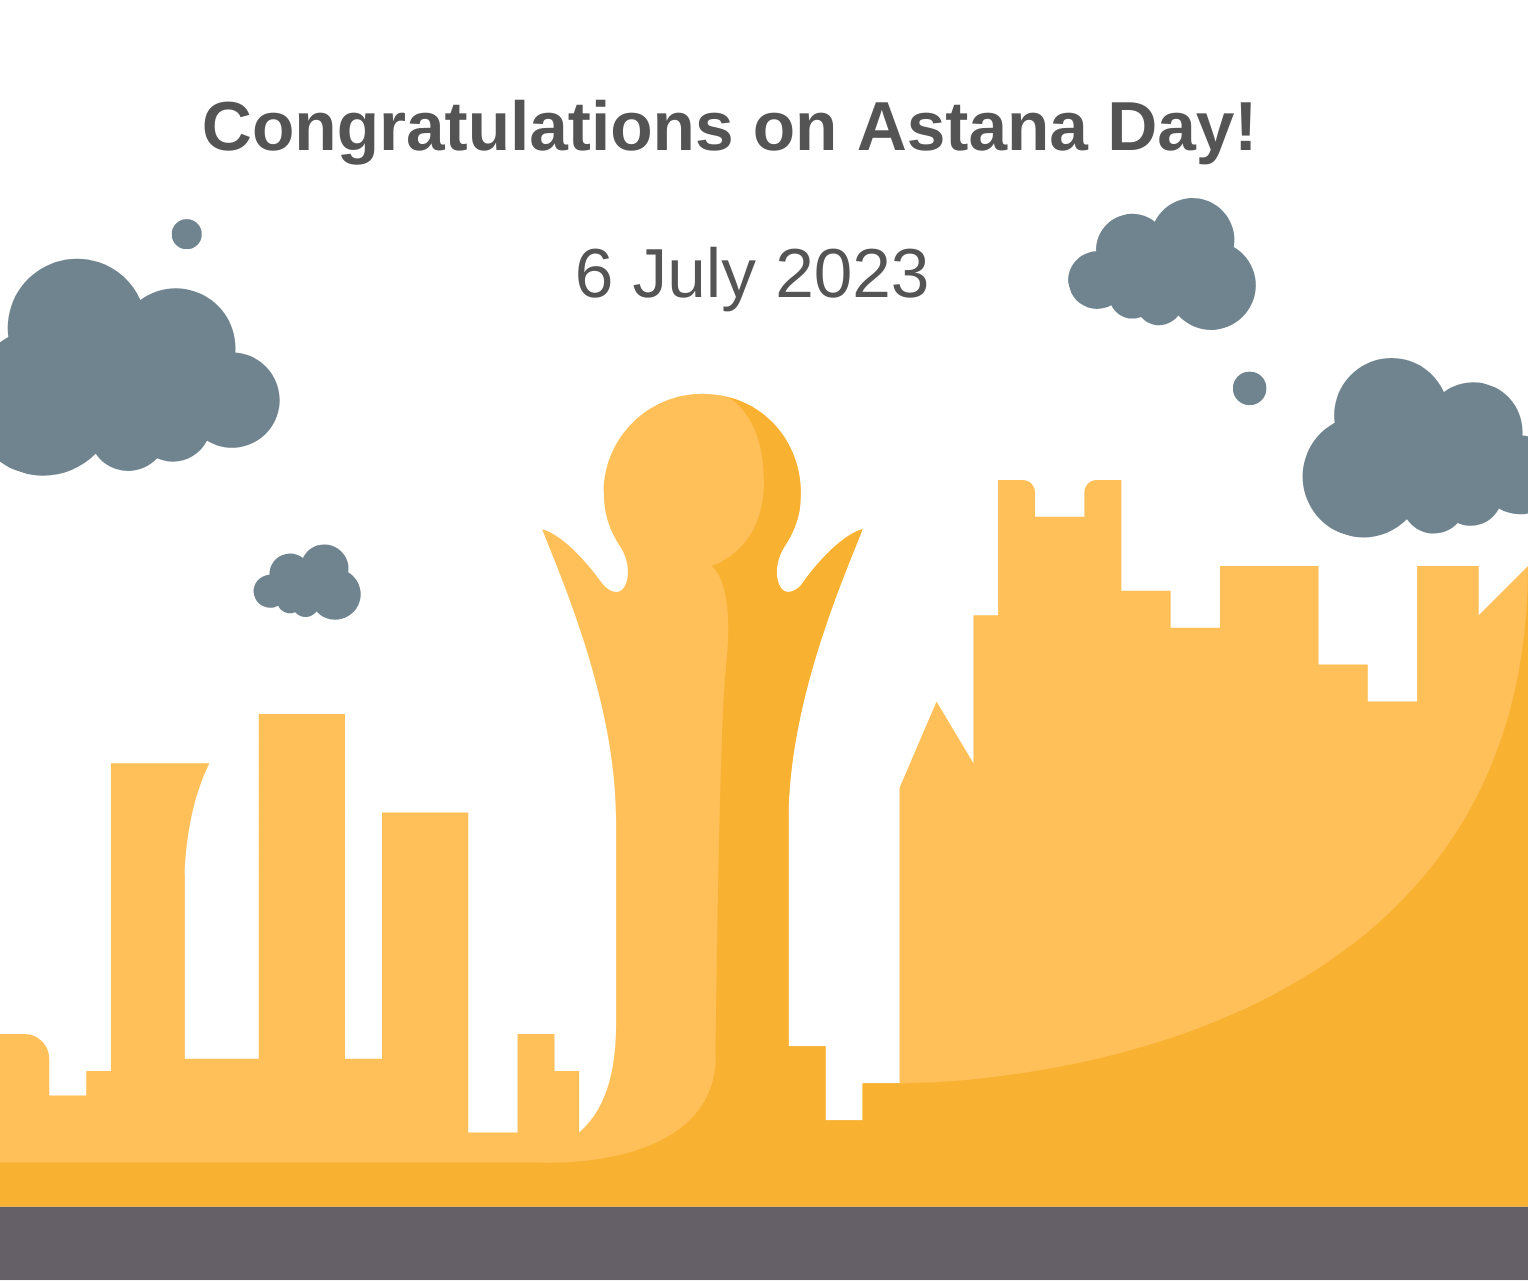 Happy Day of the Astana Day!